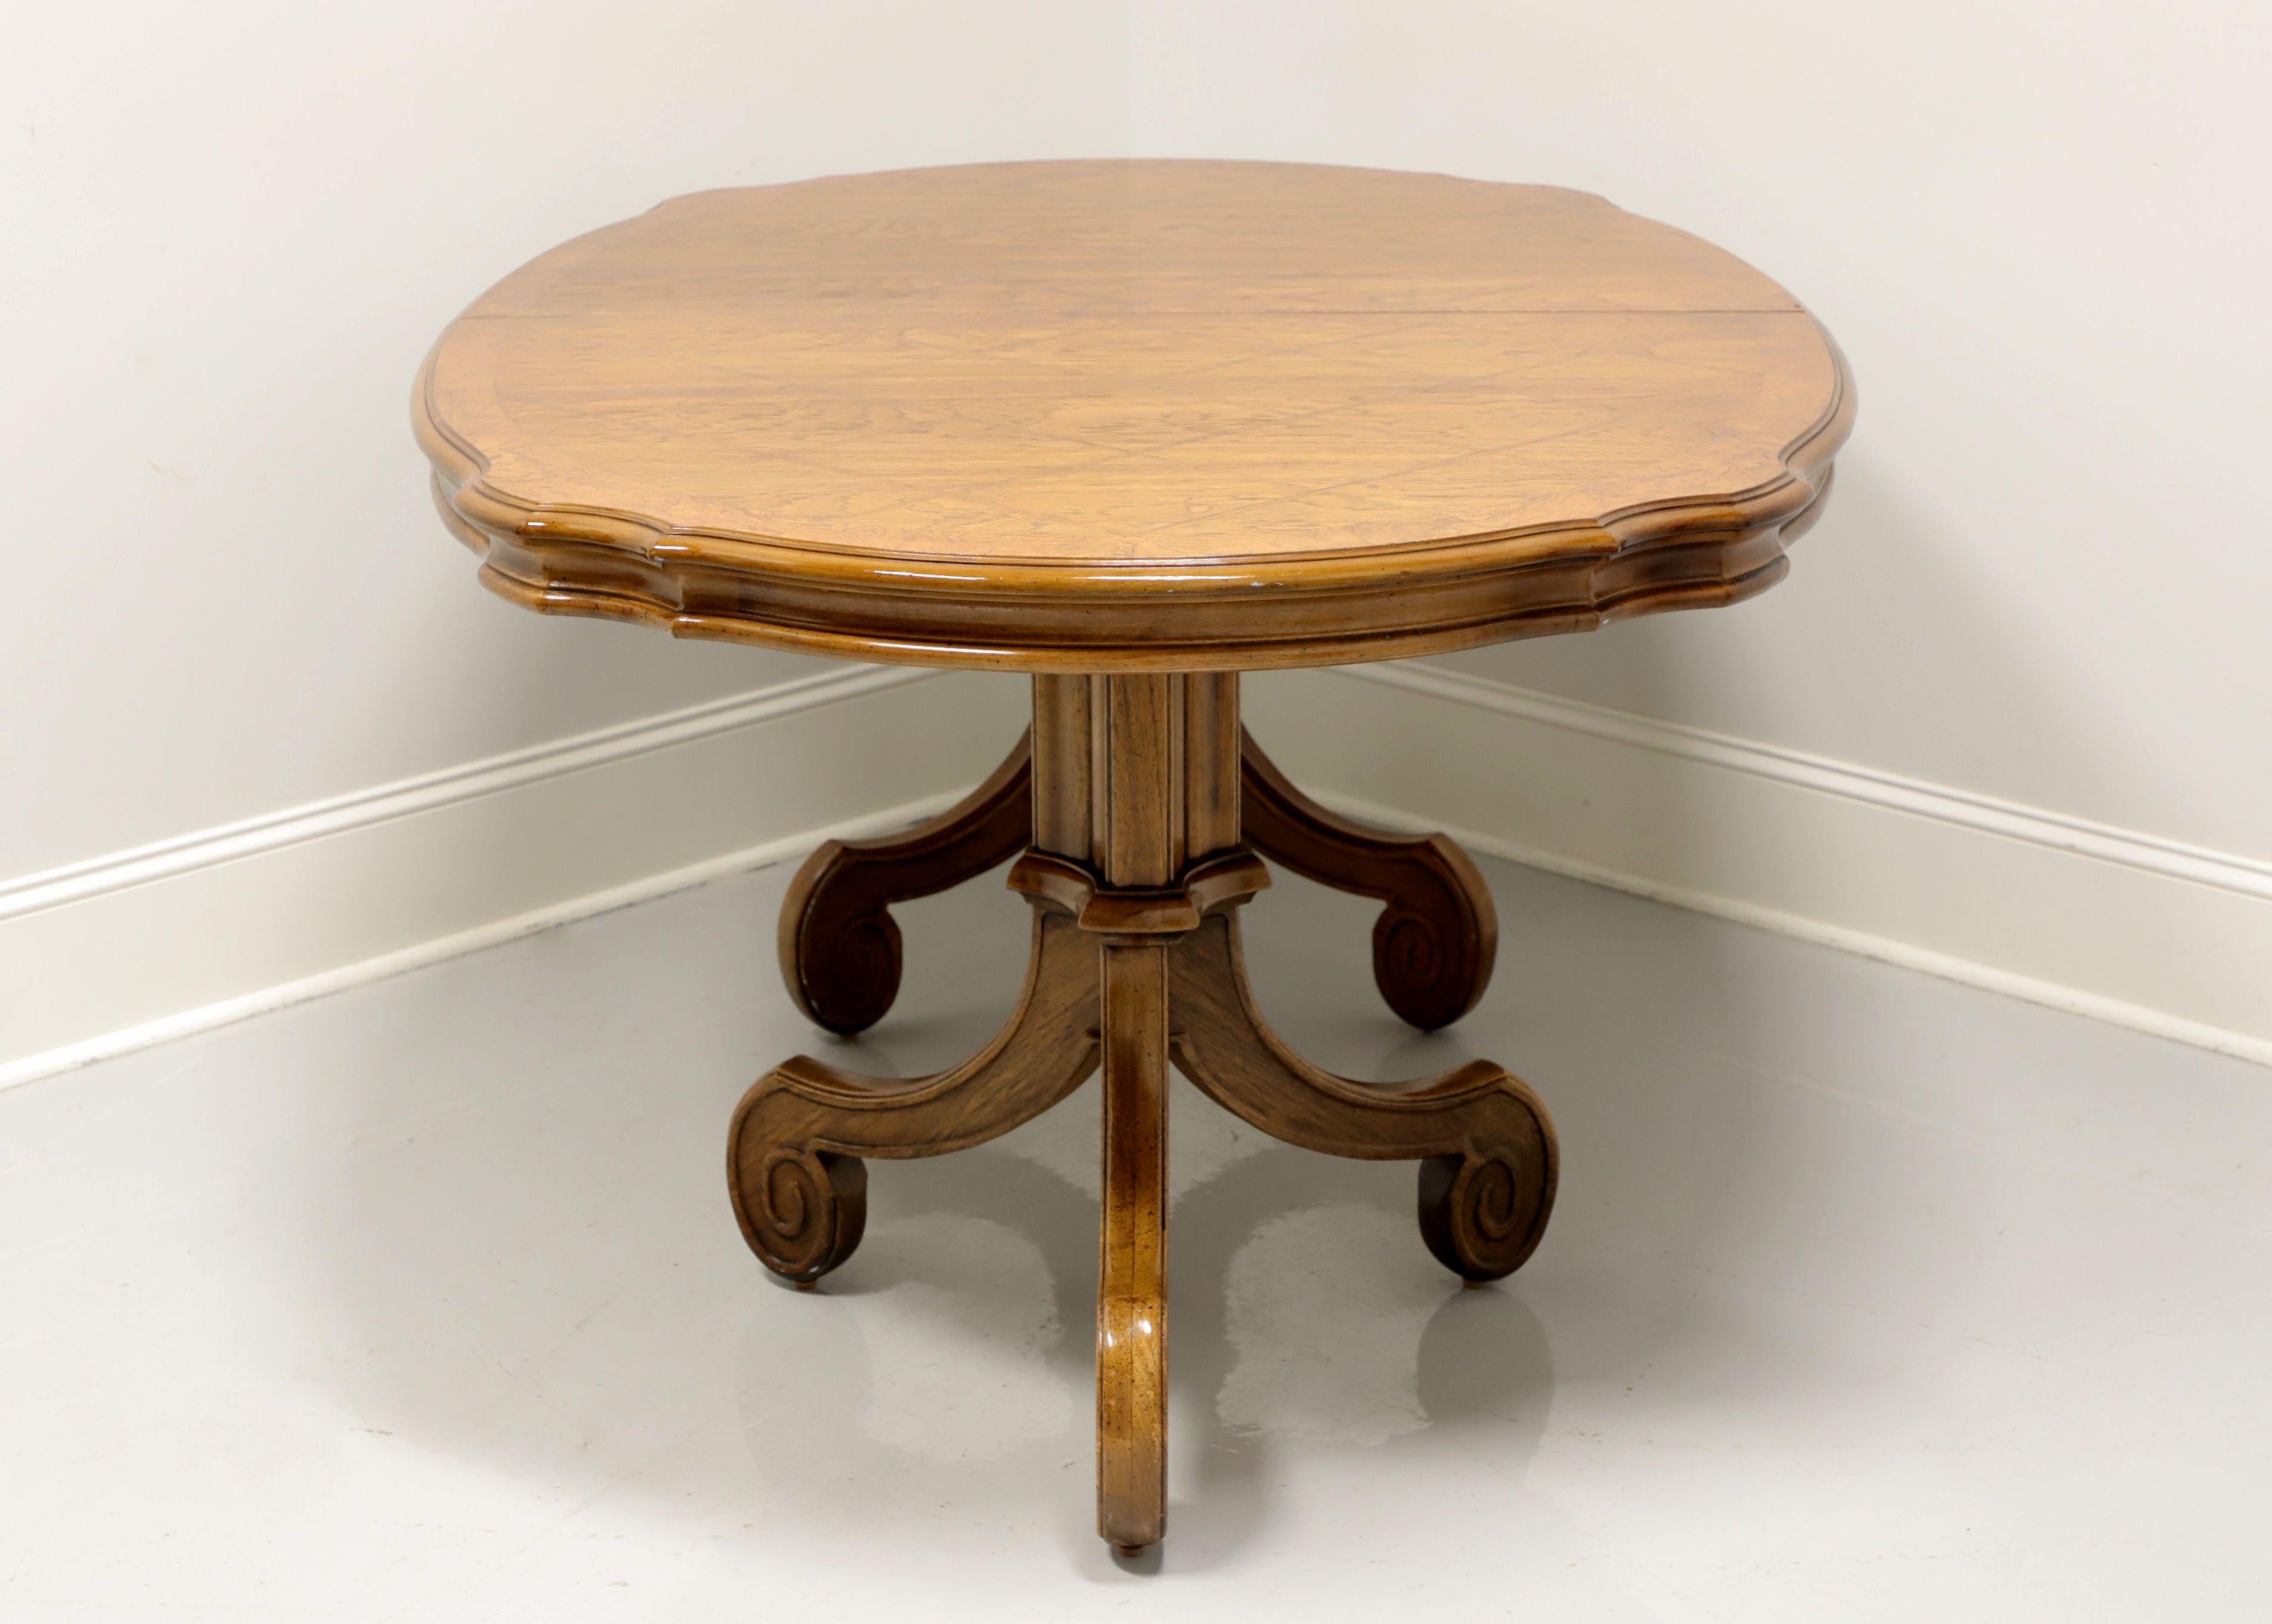 A Mediterranean style oval dining table by Thomasville, from their Ceremony Collection. Walnut with top surface featuring a parquet pattern and burl banding. Double pedestals with three scroll like legs. Metal expansion sliders. Includes two